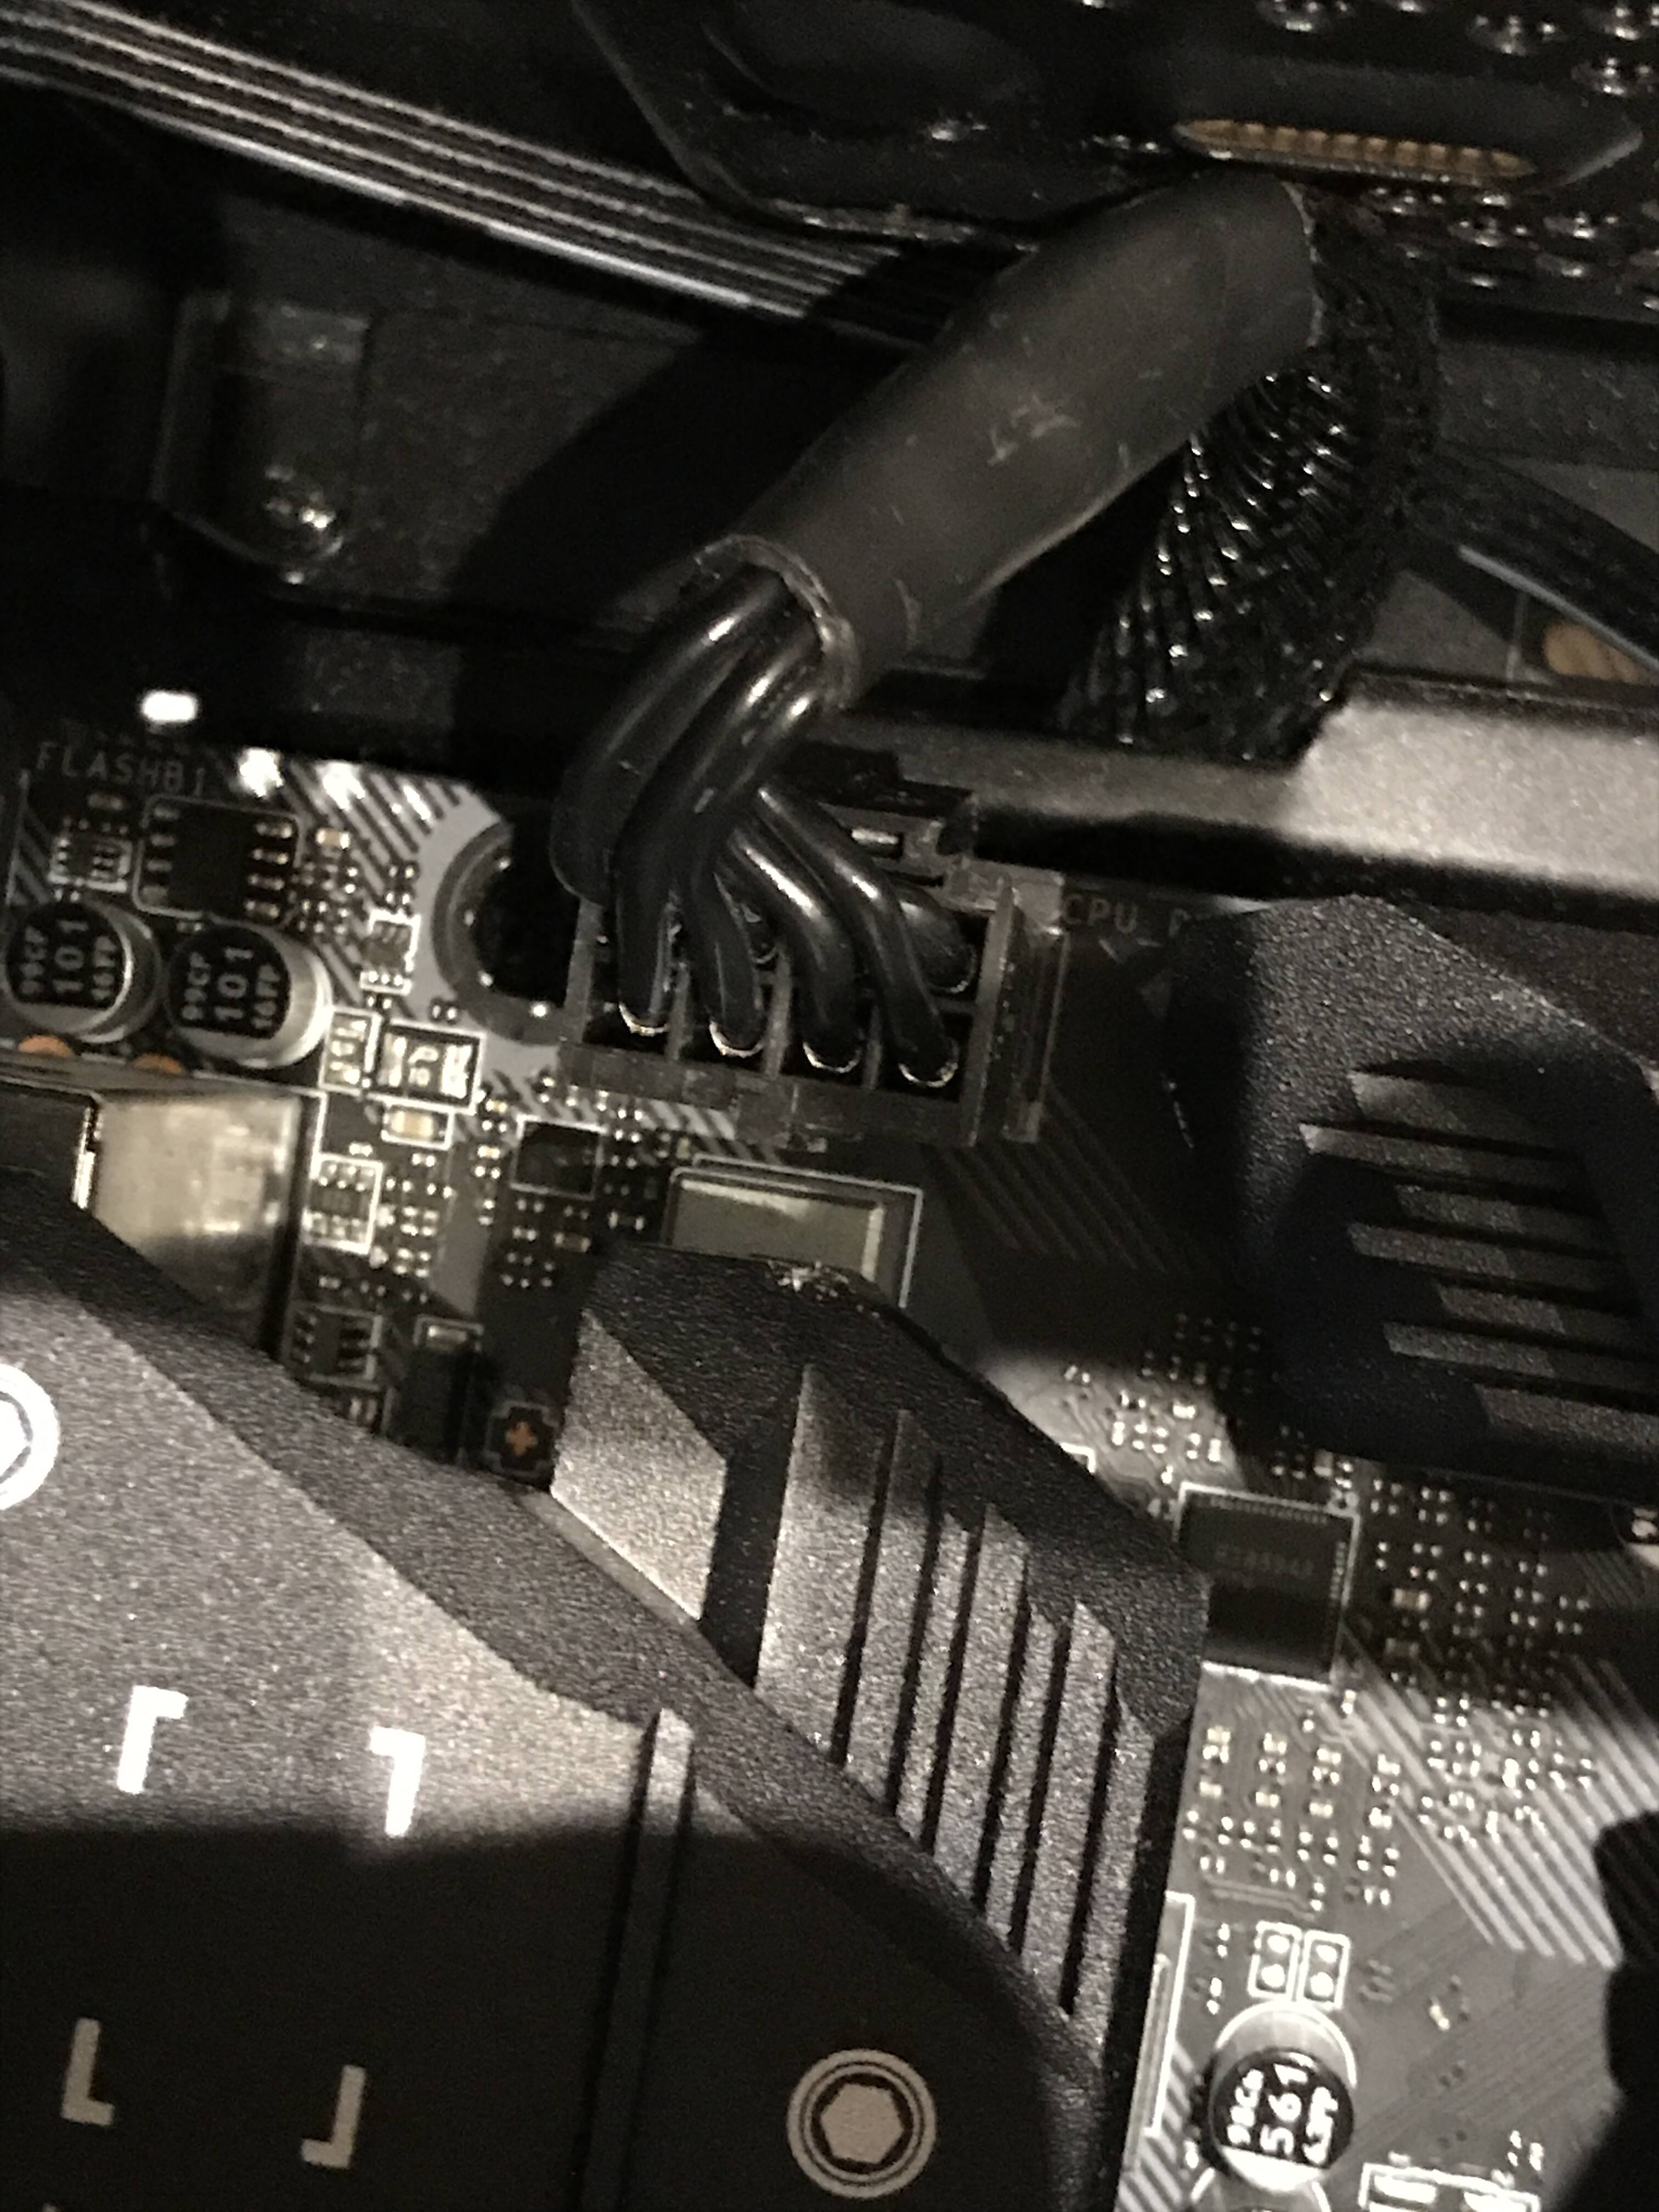 Pijnboom Proportioneel walgelijk Cant unplug 8pin cpu cable from mobo - Troubleshooting - Linus Tech Tips